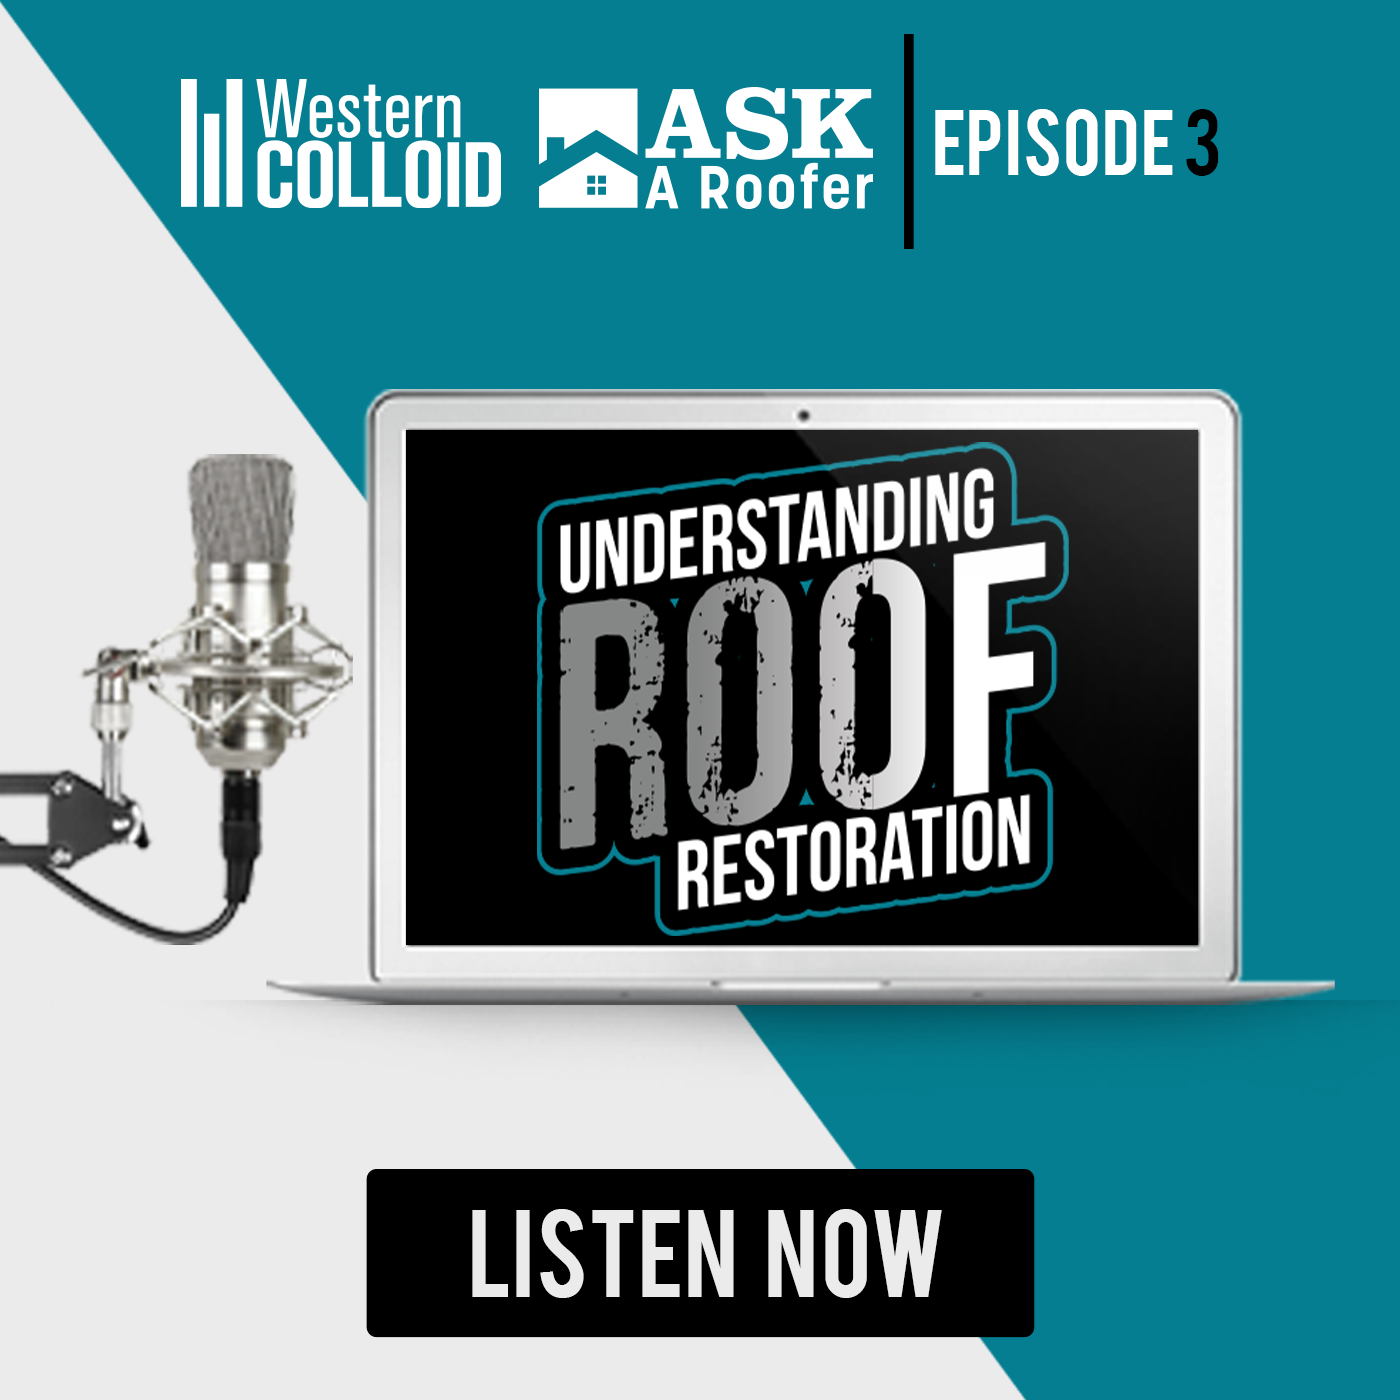 Western Colloid - Understanding Roof Restoration Episode 3 - How to Deal With Roof Deck Damage